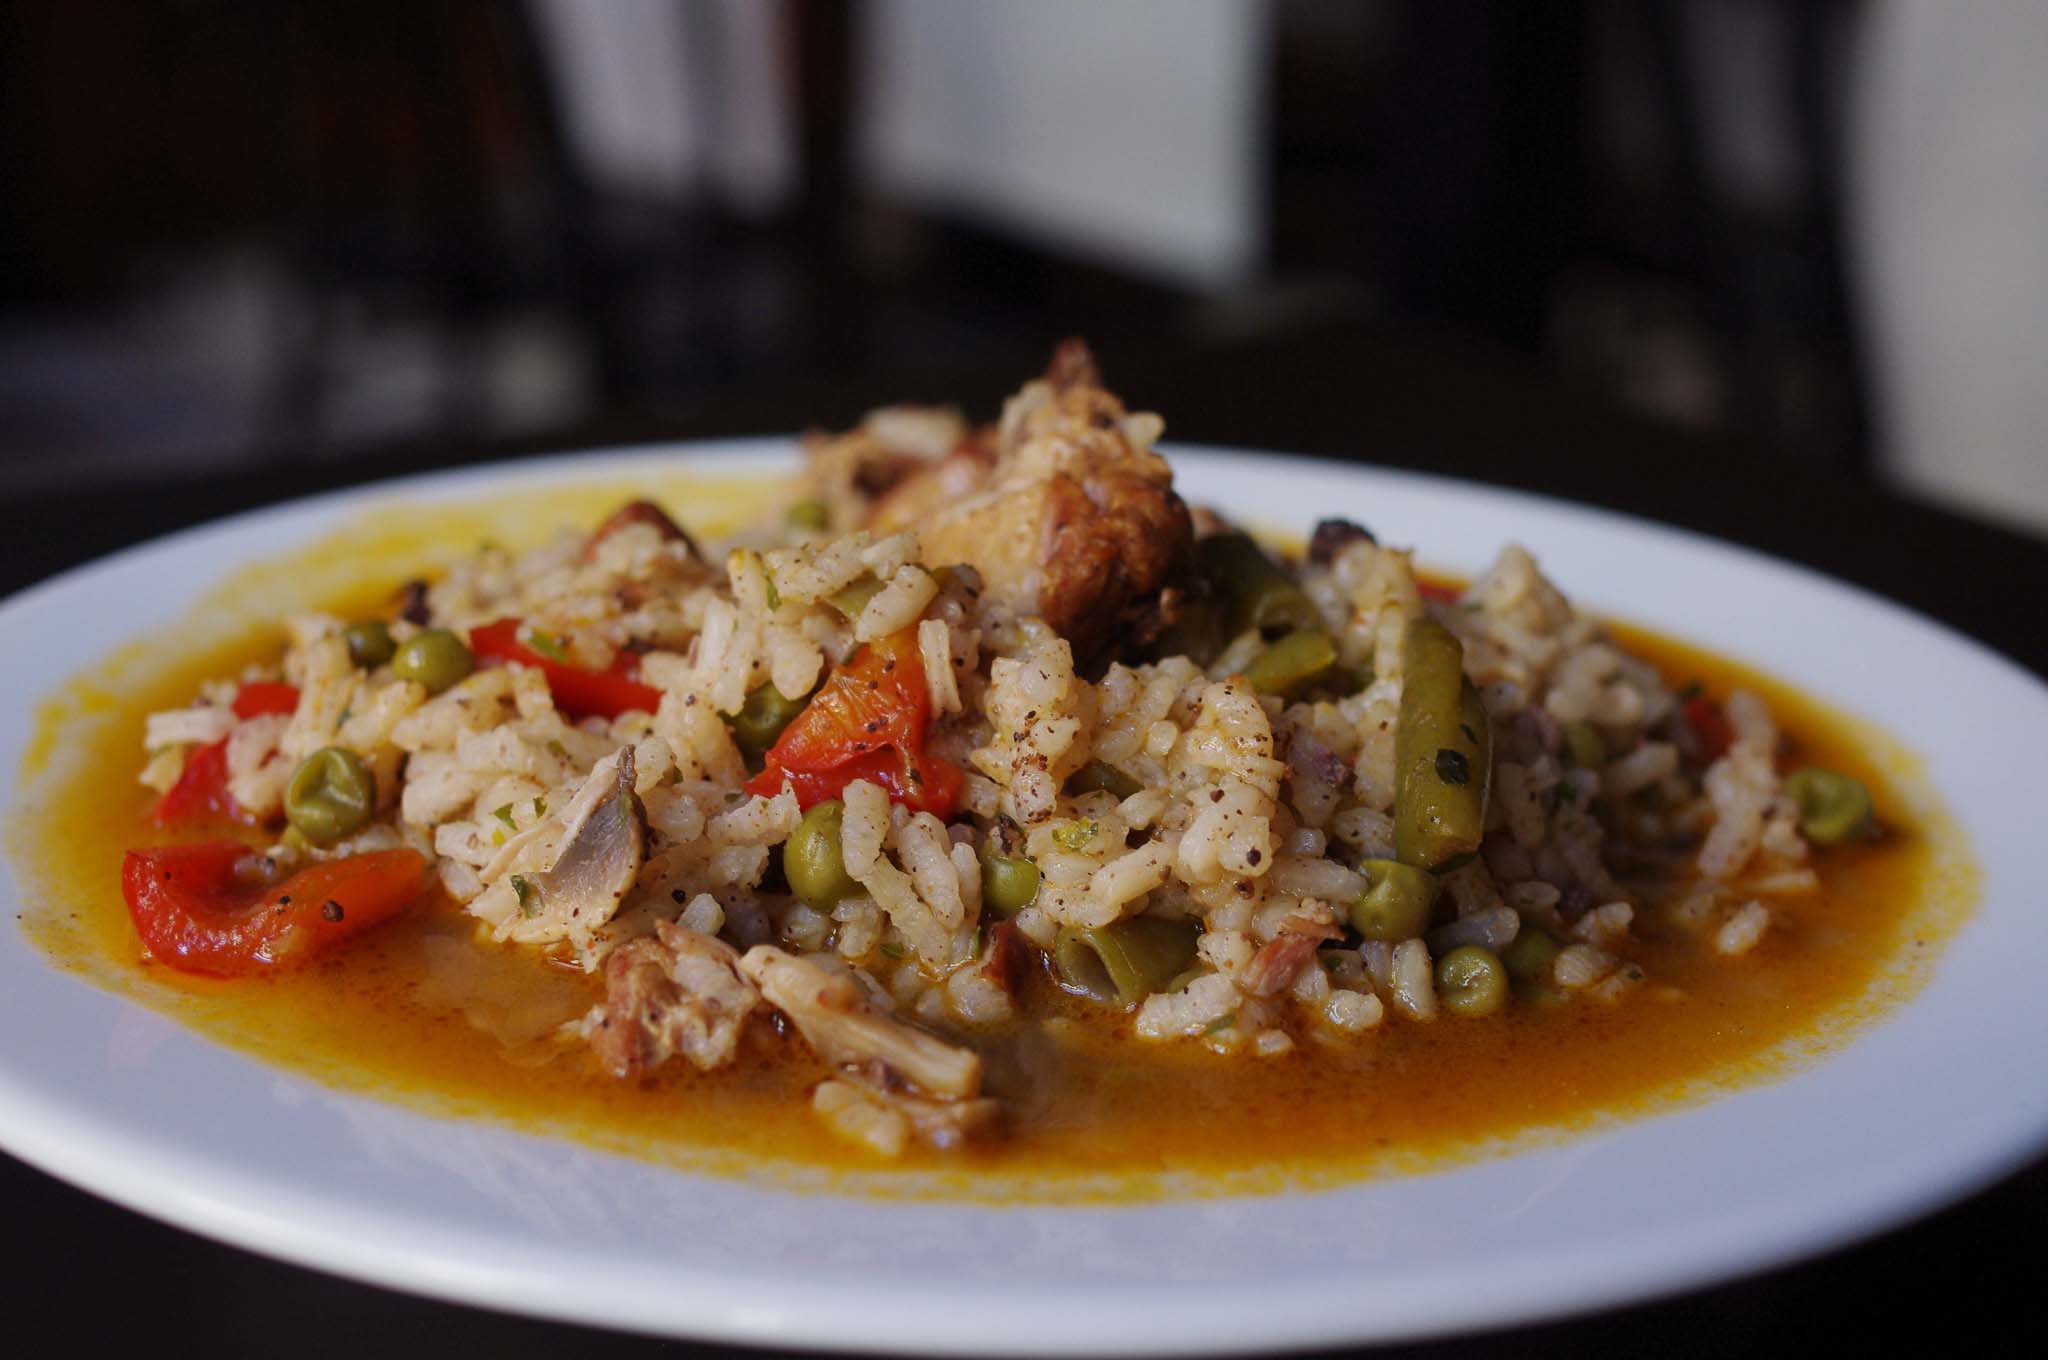 Typical majorcan rice recipe